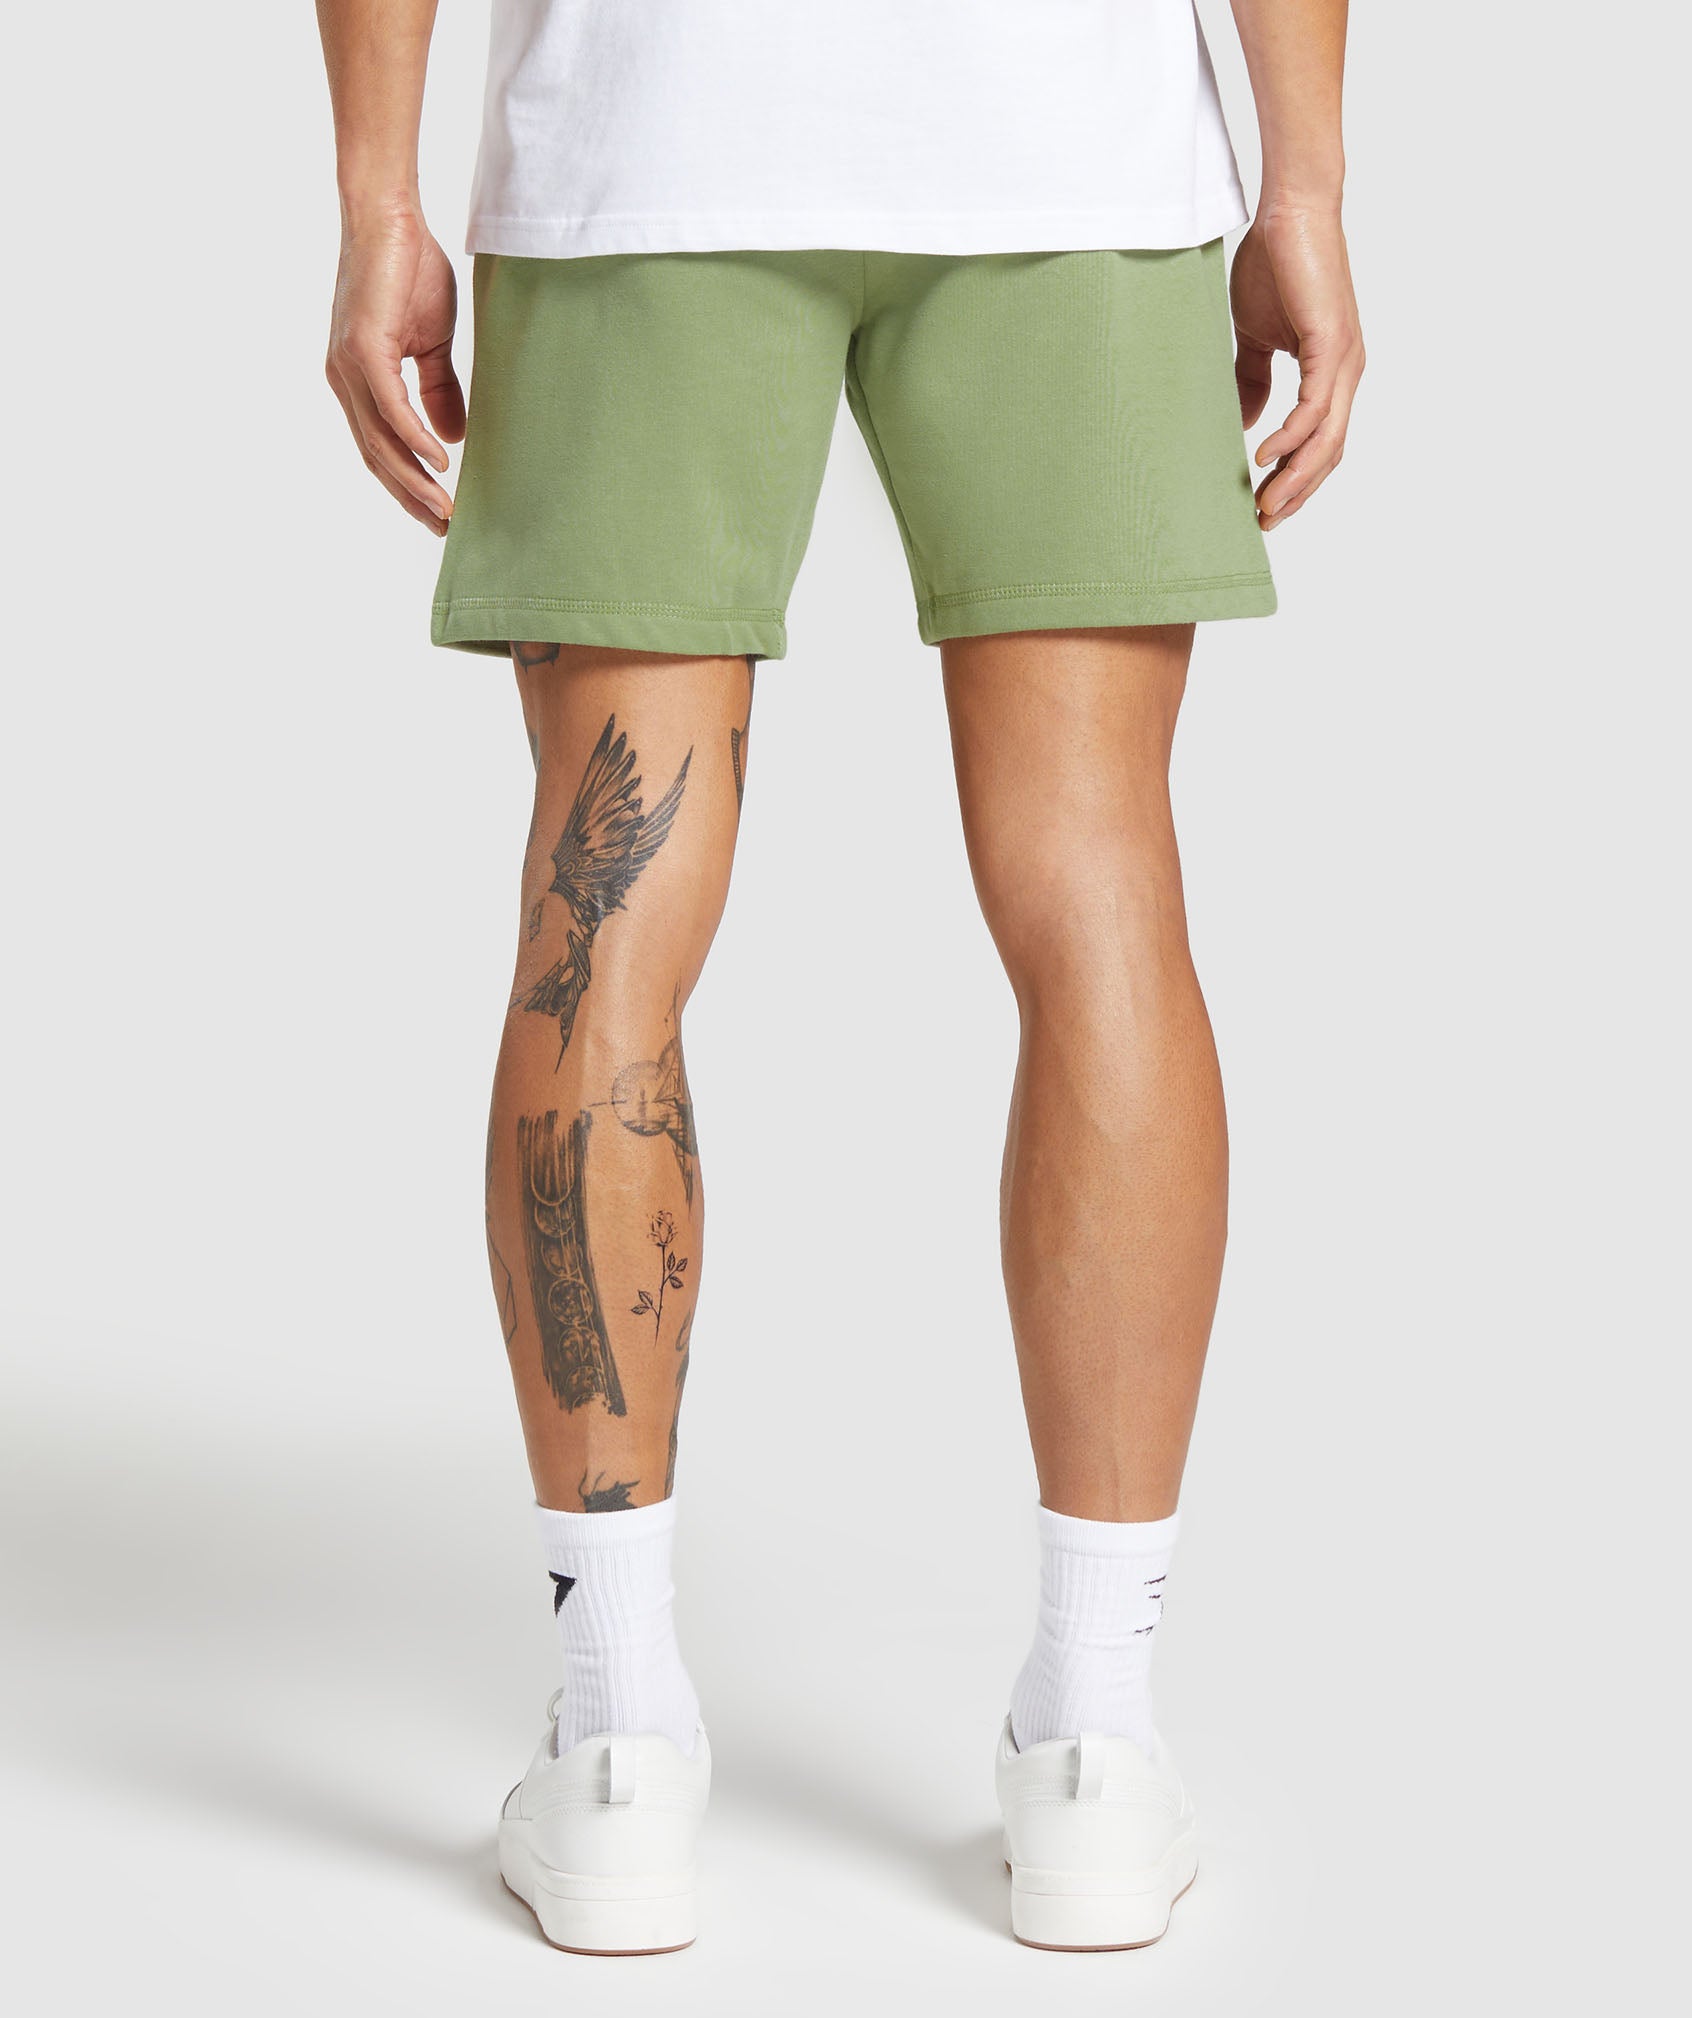 Crest 7" Shorts in Natural Sage Green - view 2